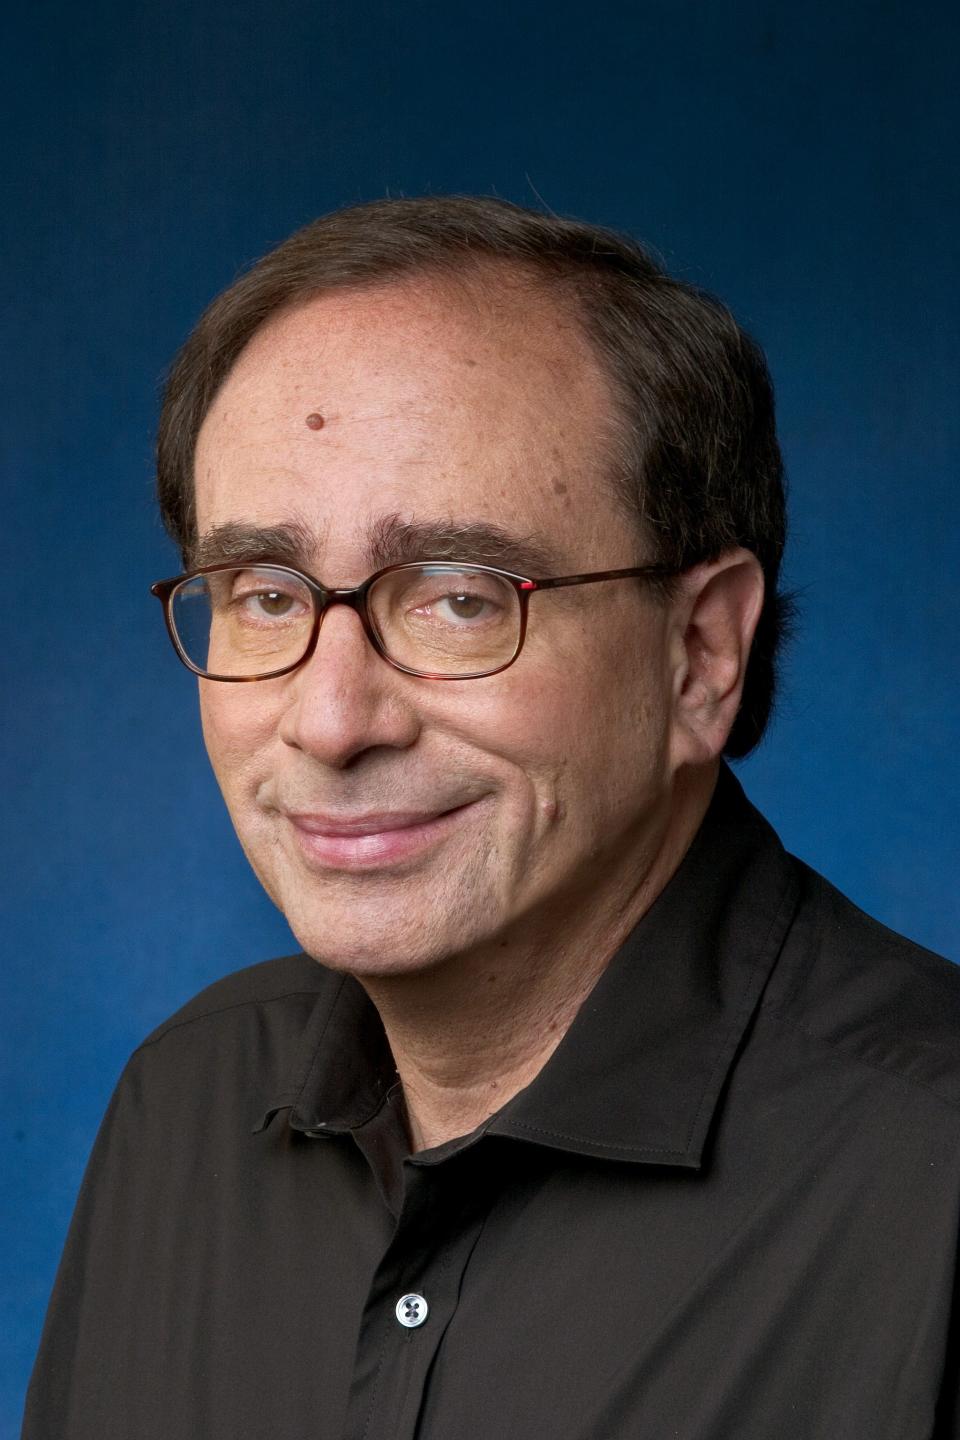 Bexley's own R.L. Stine, who's been called "the Stephen King of children's literature," will visit Gramercy Books on Oct. 22.